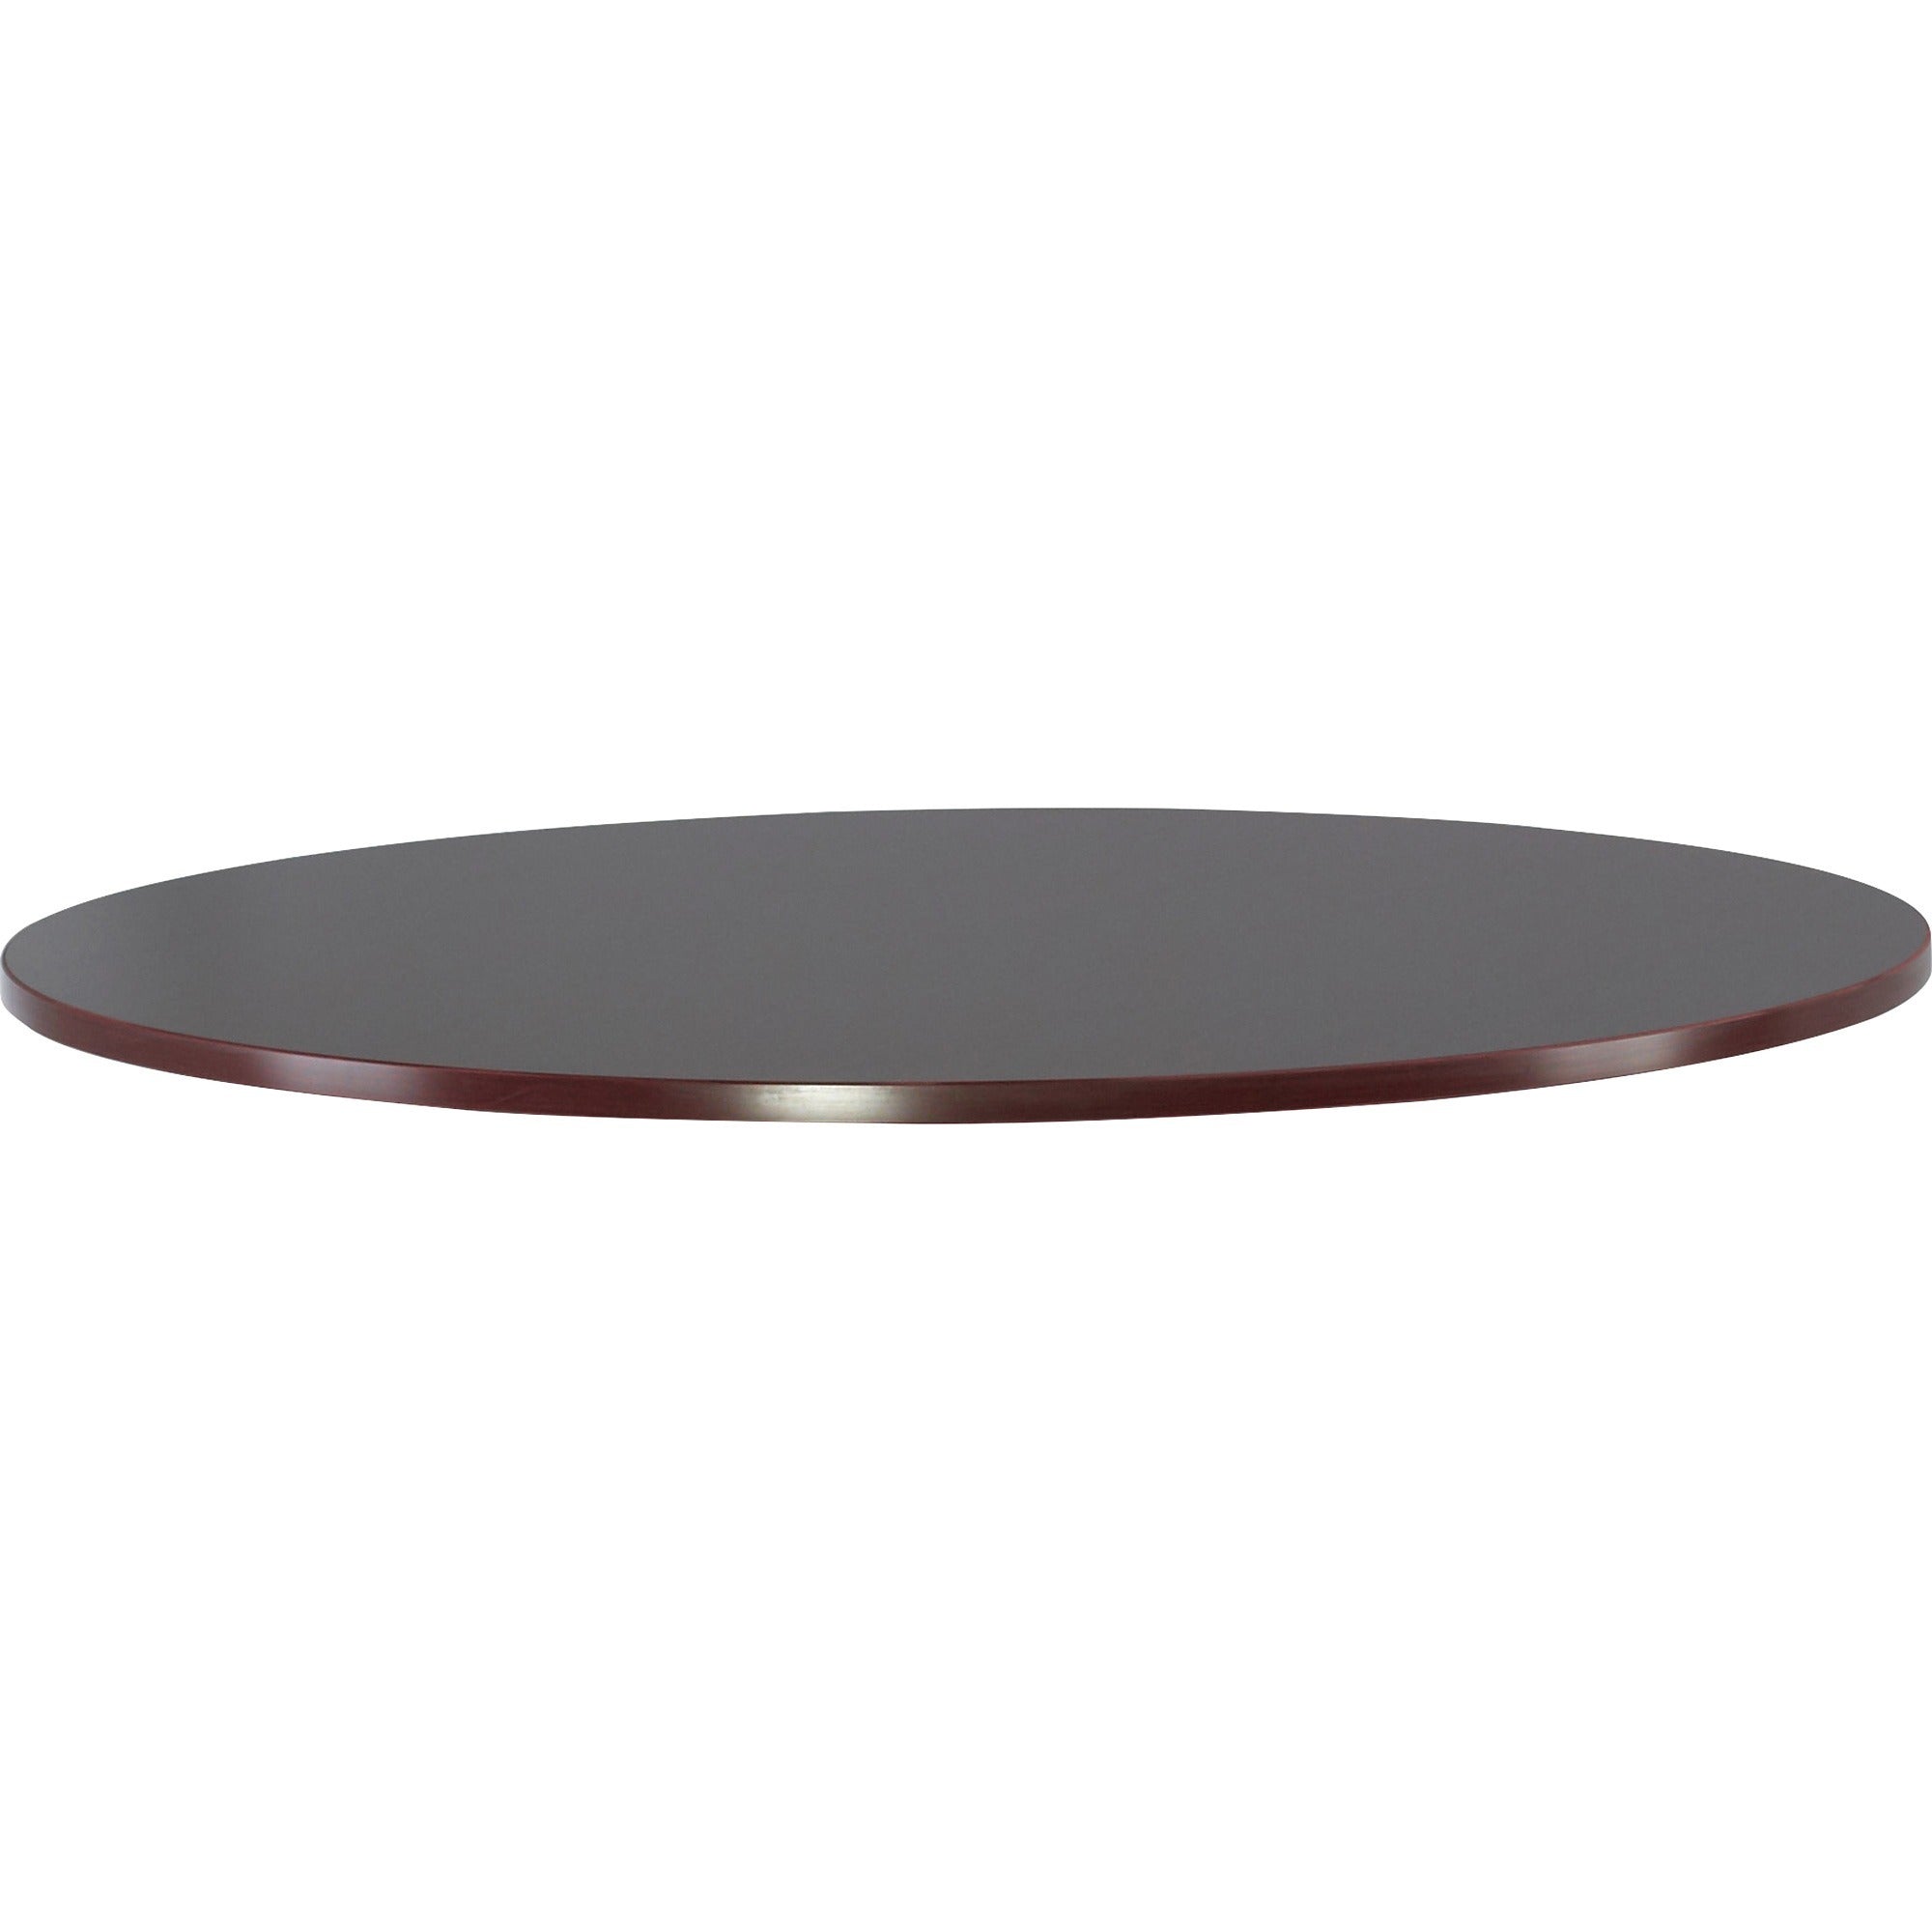 Lorell Essentials Round Conference Table Base - 24" x 24" x 29" - Material: Wood - Finish: Laminate, Mahogany - 